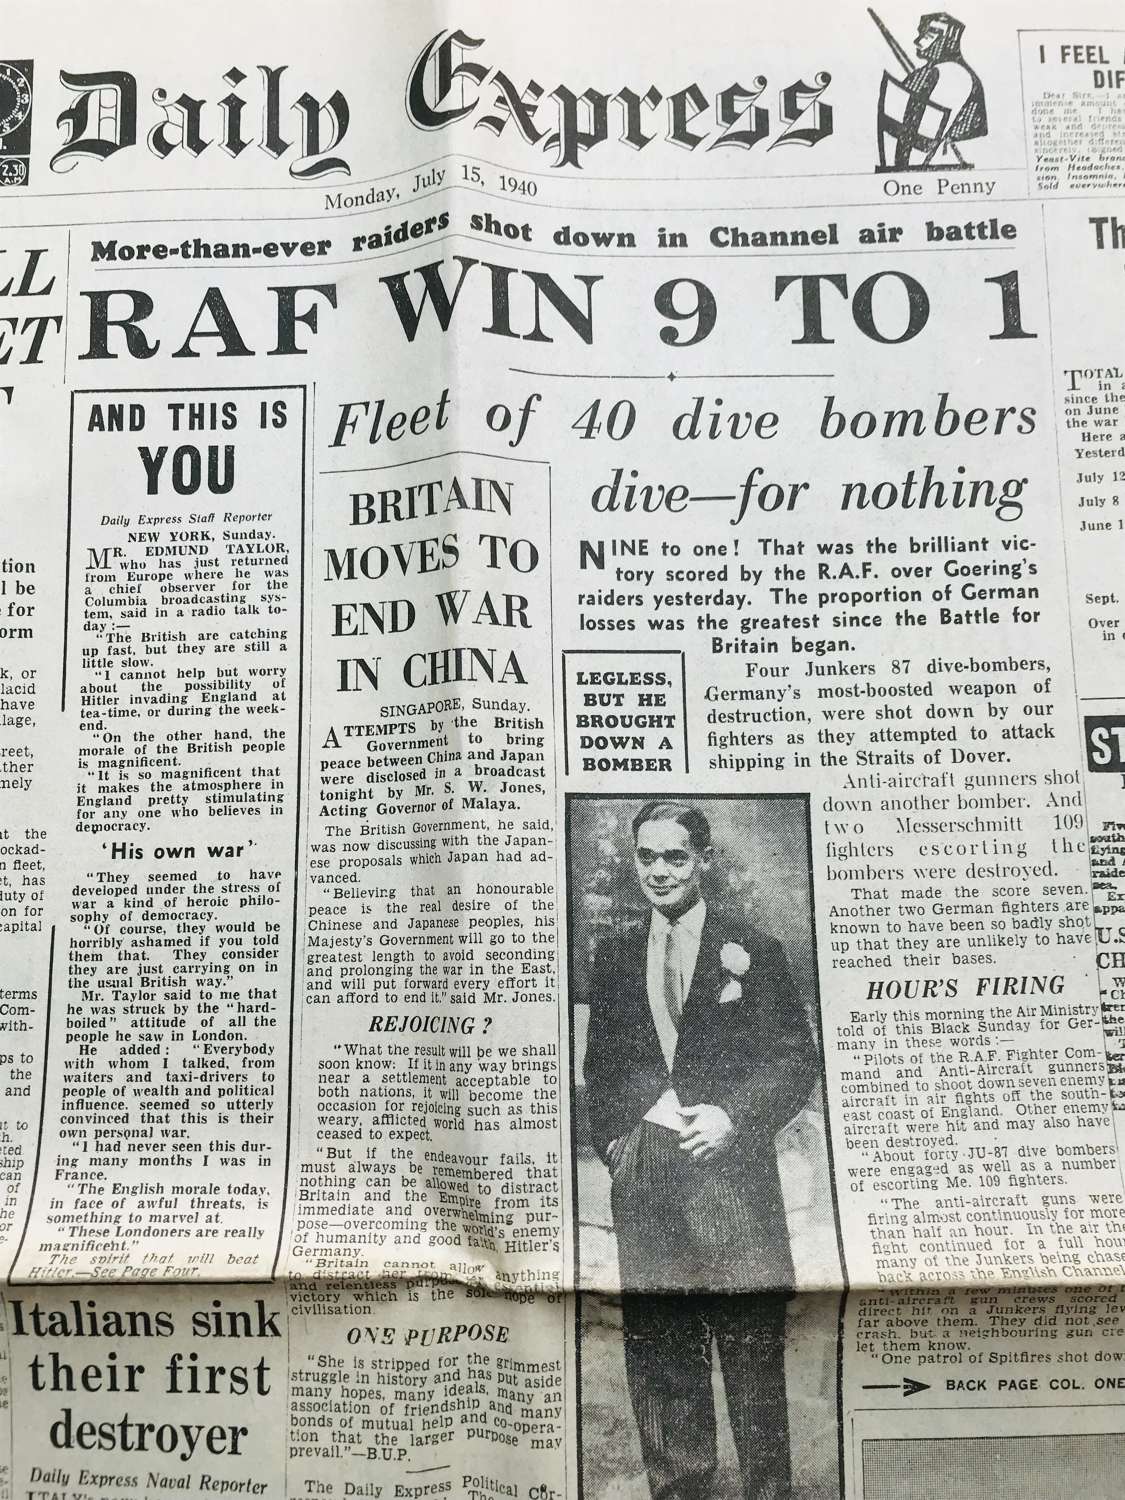 Daily express dated Monday,  15th July 1940